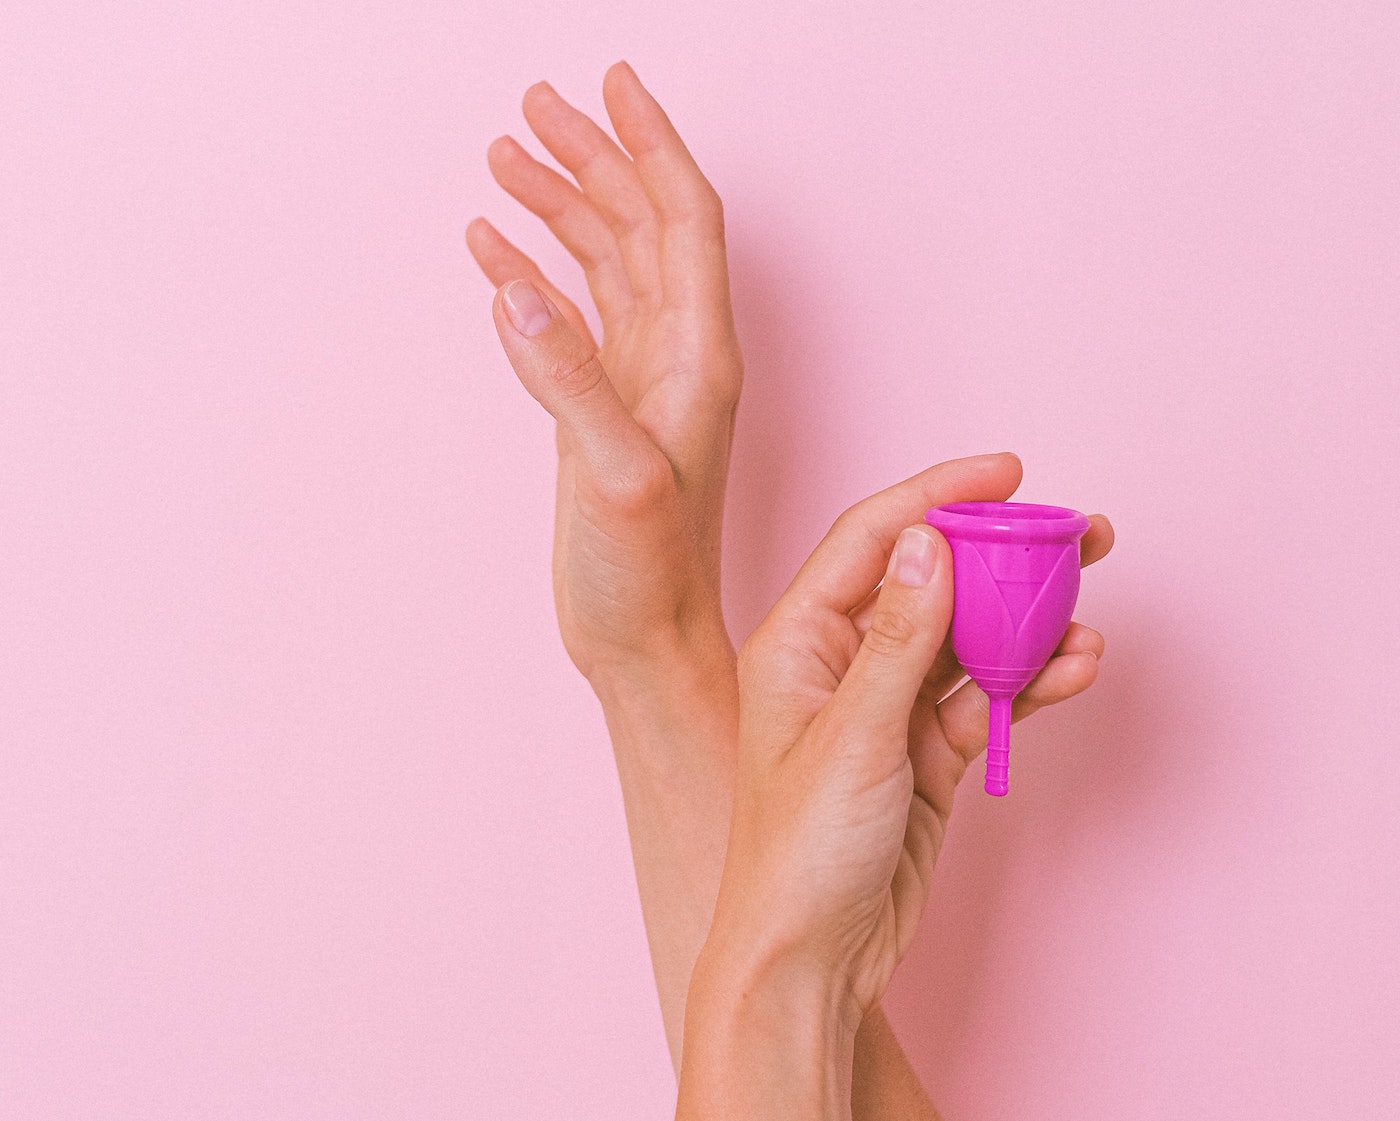 Hands hold up menstrual cup